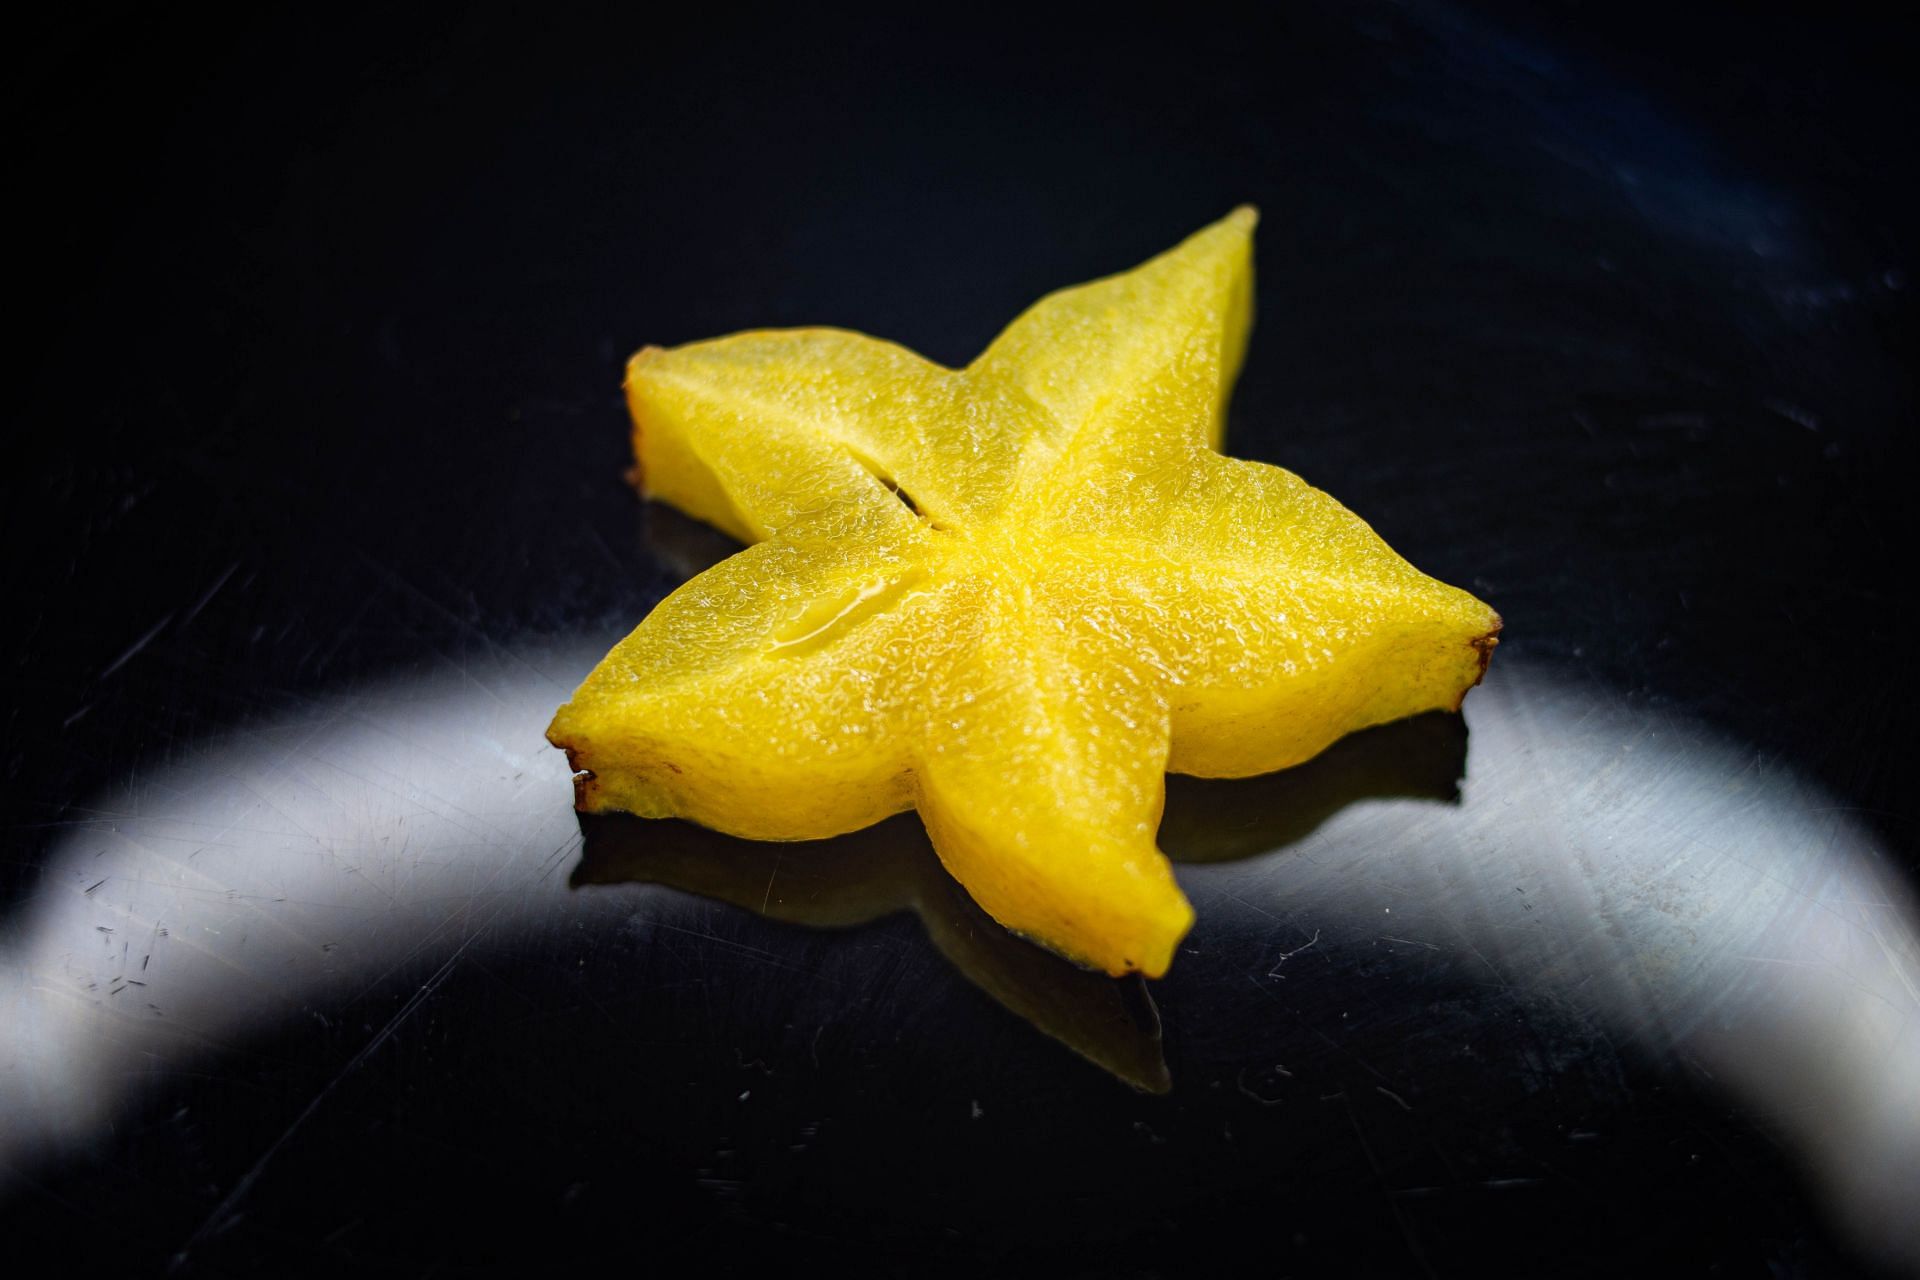 Yellow star fruit is not safe for people with kidney disease. (Image via Unsplash/Lucas George Wendt)